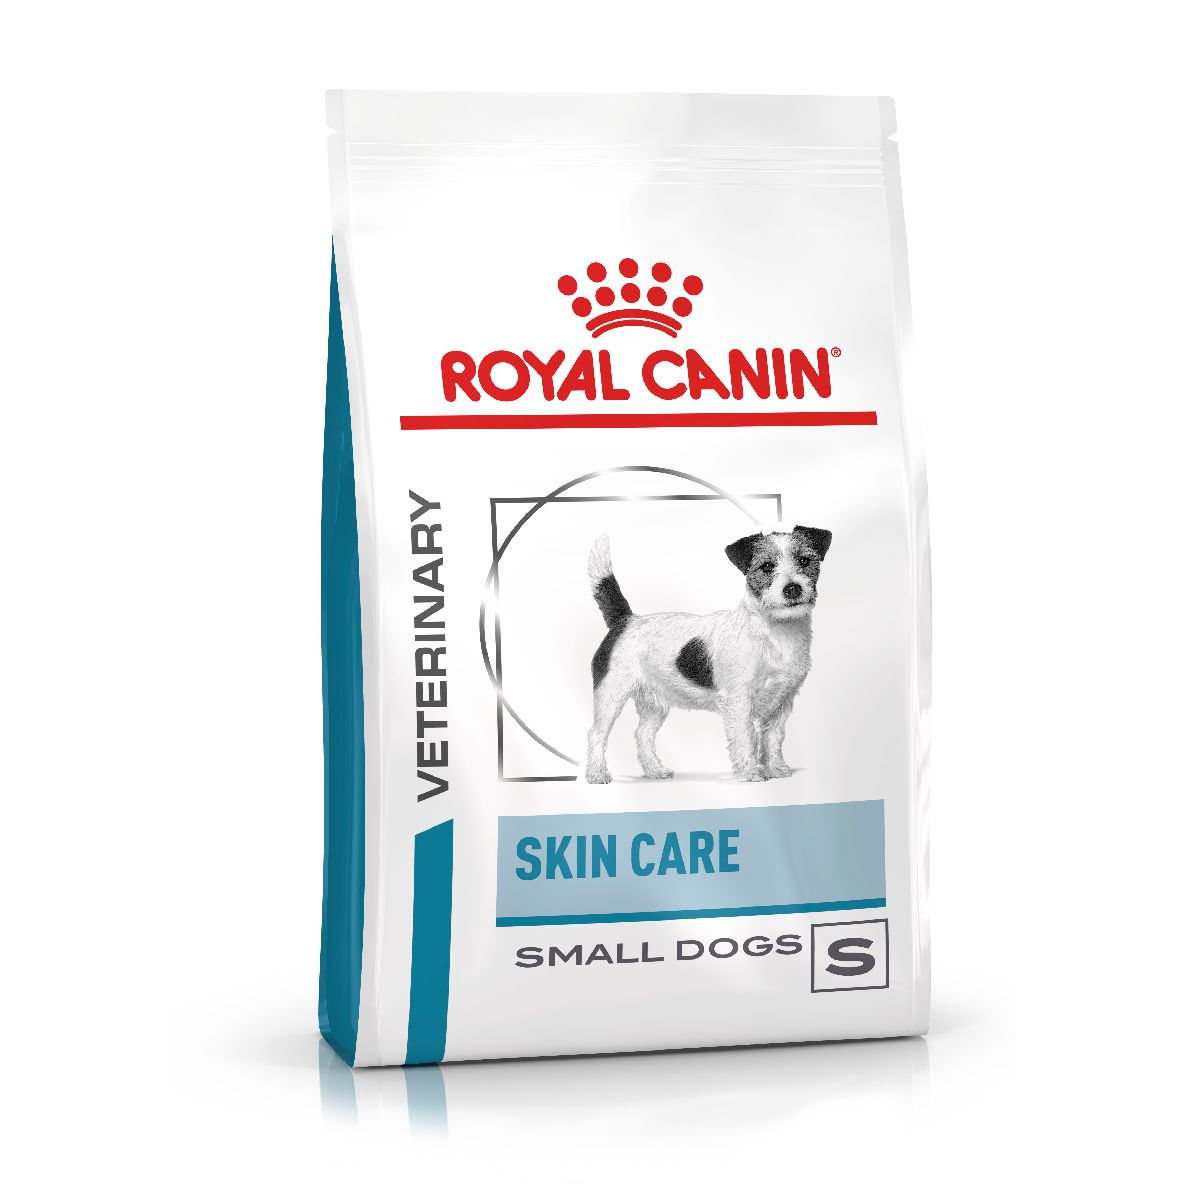 SKIN CARE SMALL DOG Dry - Royal Canin